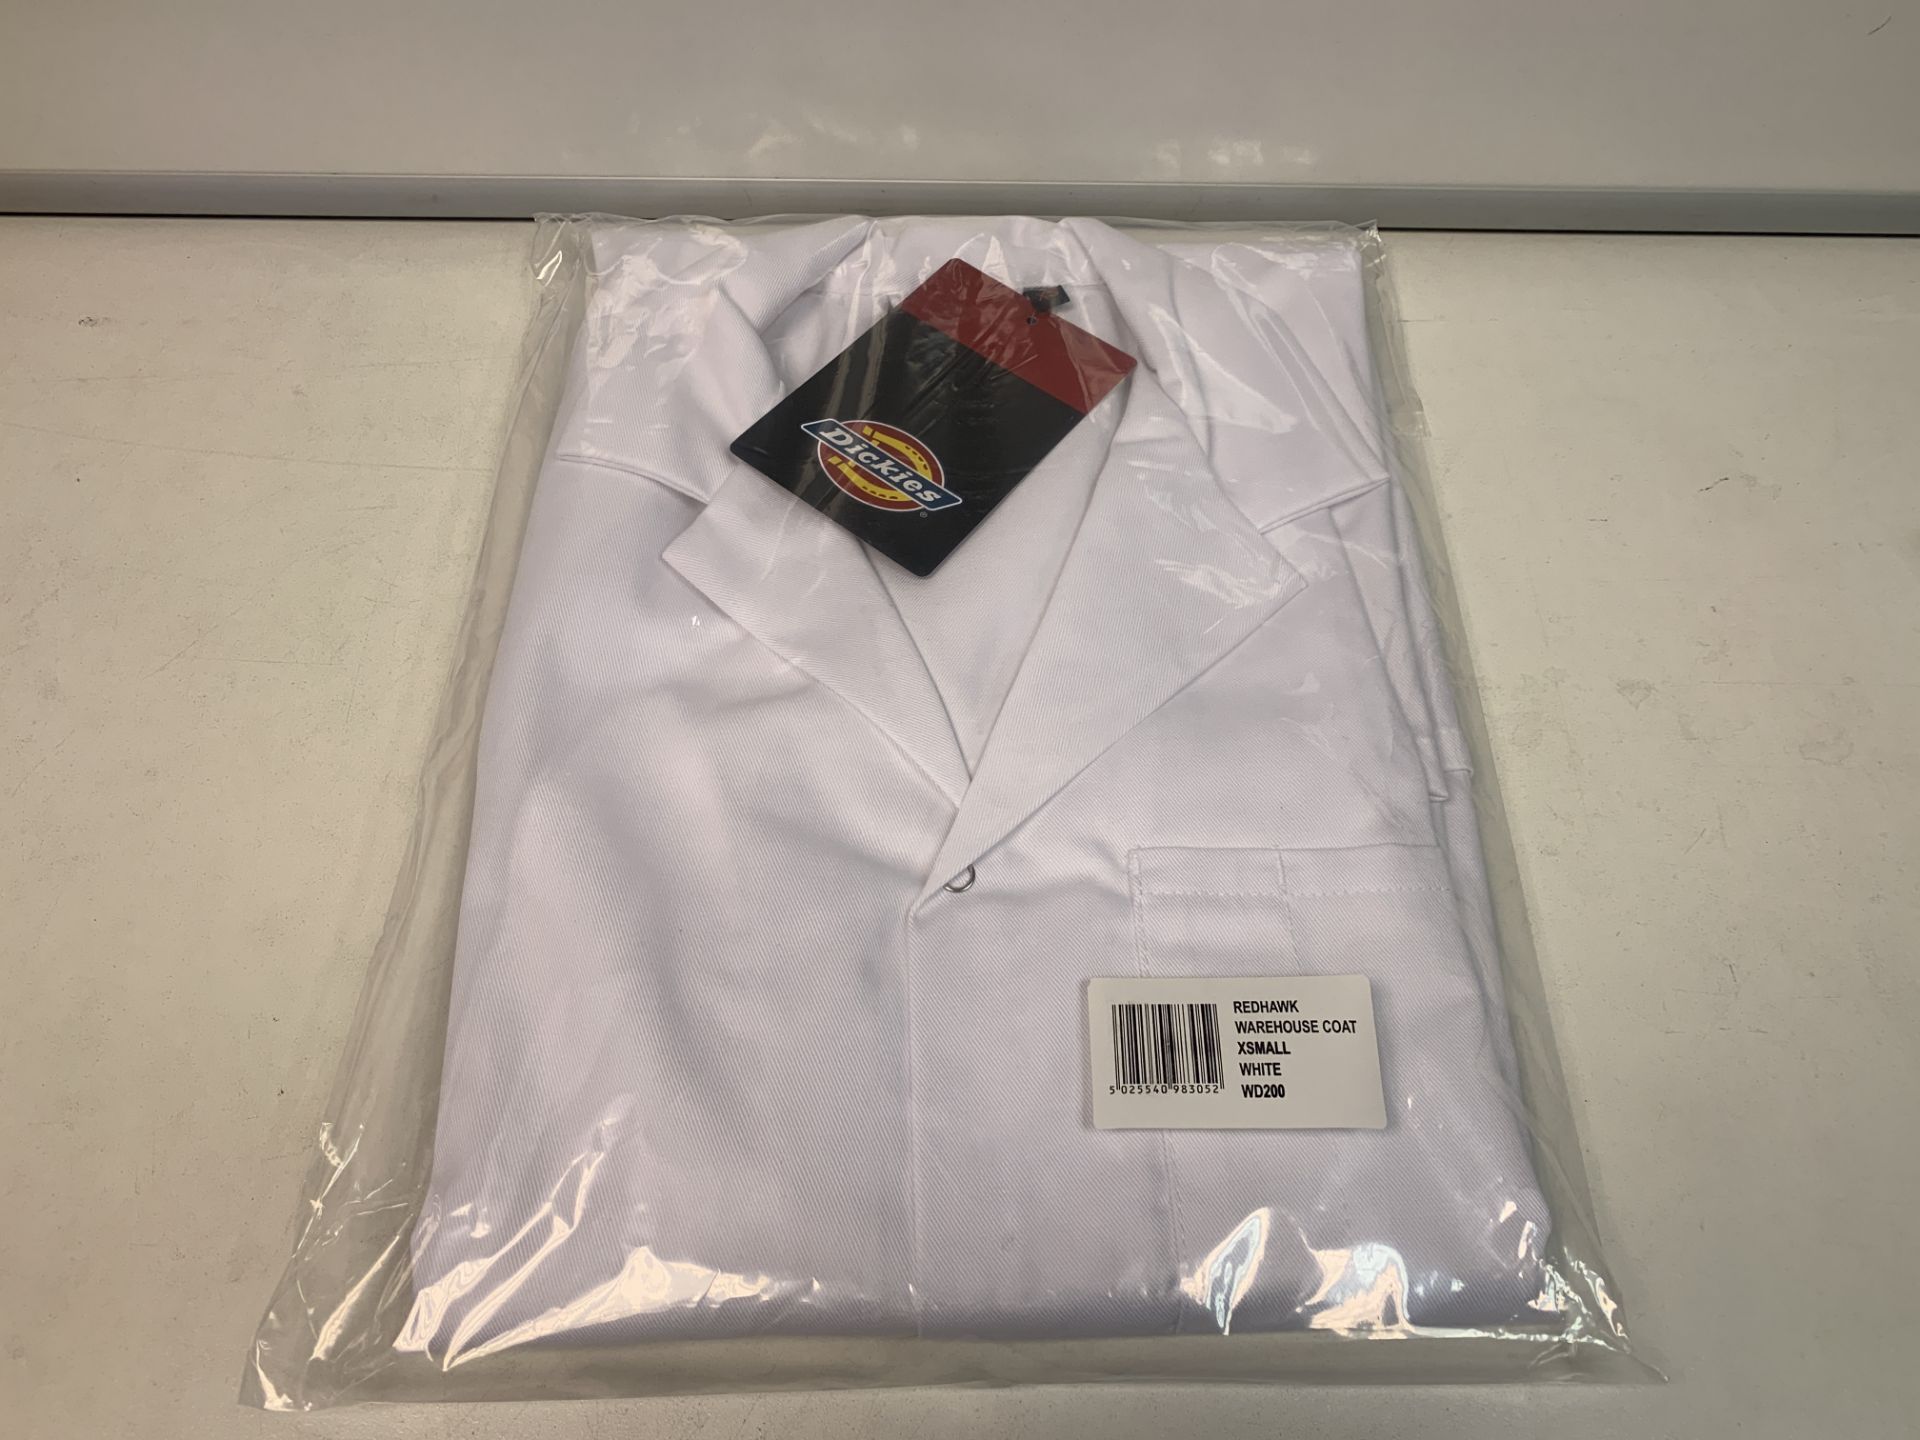 10 X BRAND NEW DICKIES REDHAWK WAREHOUSE COATS WHITE SIZE XS RRP £40 EACH FR